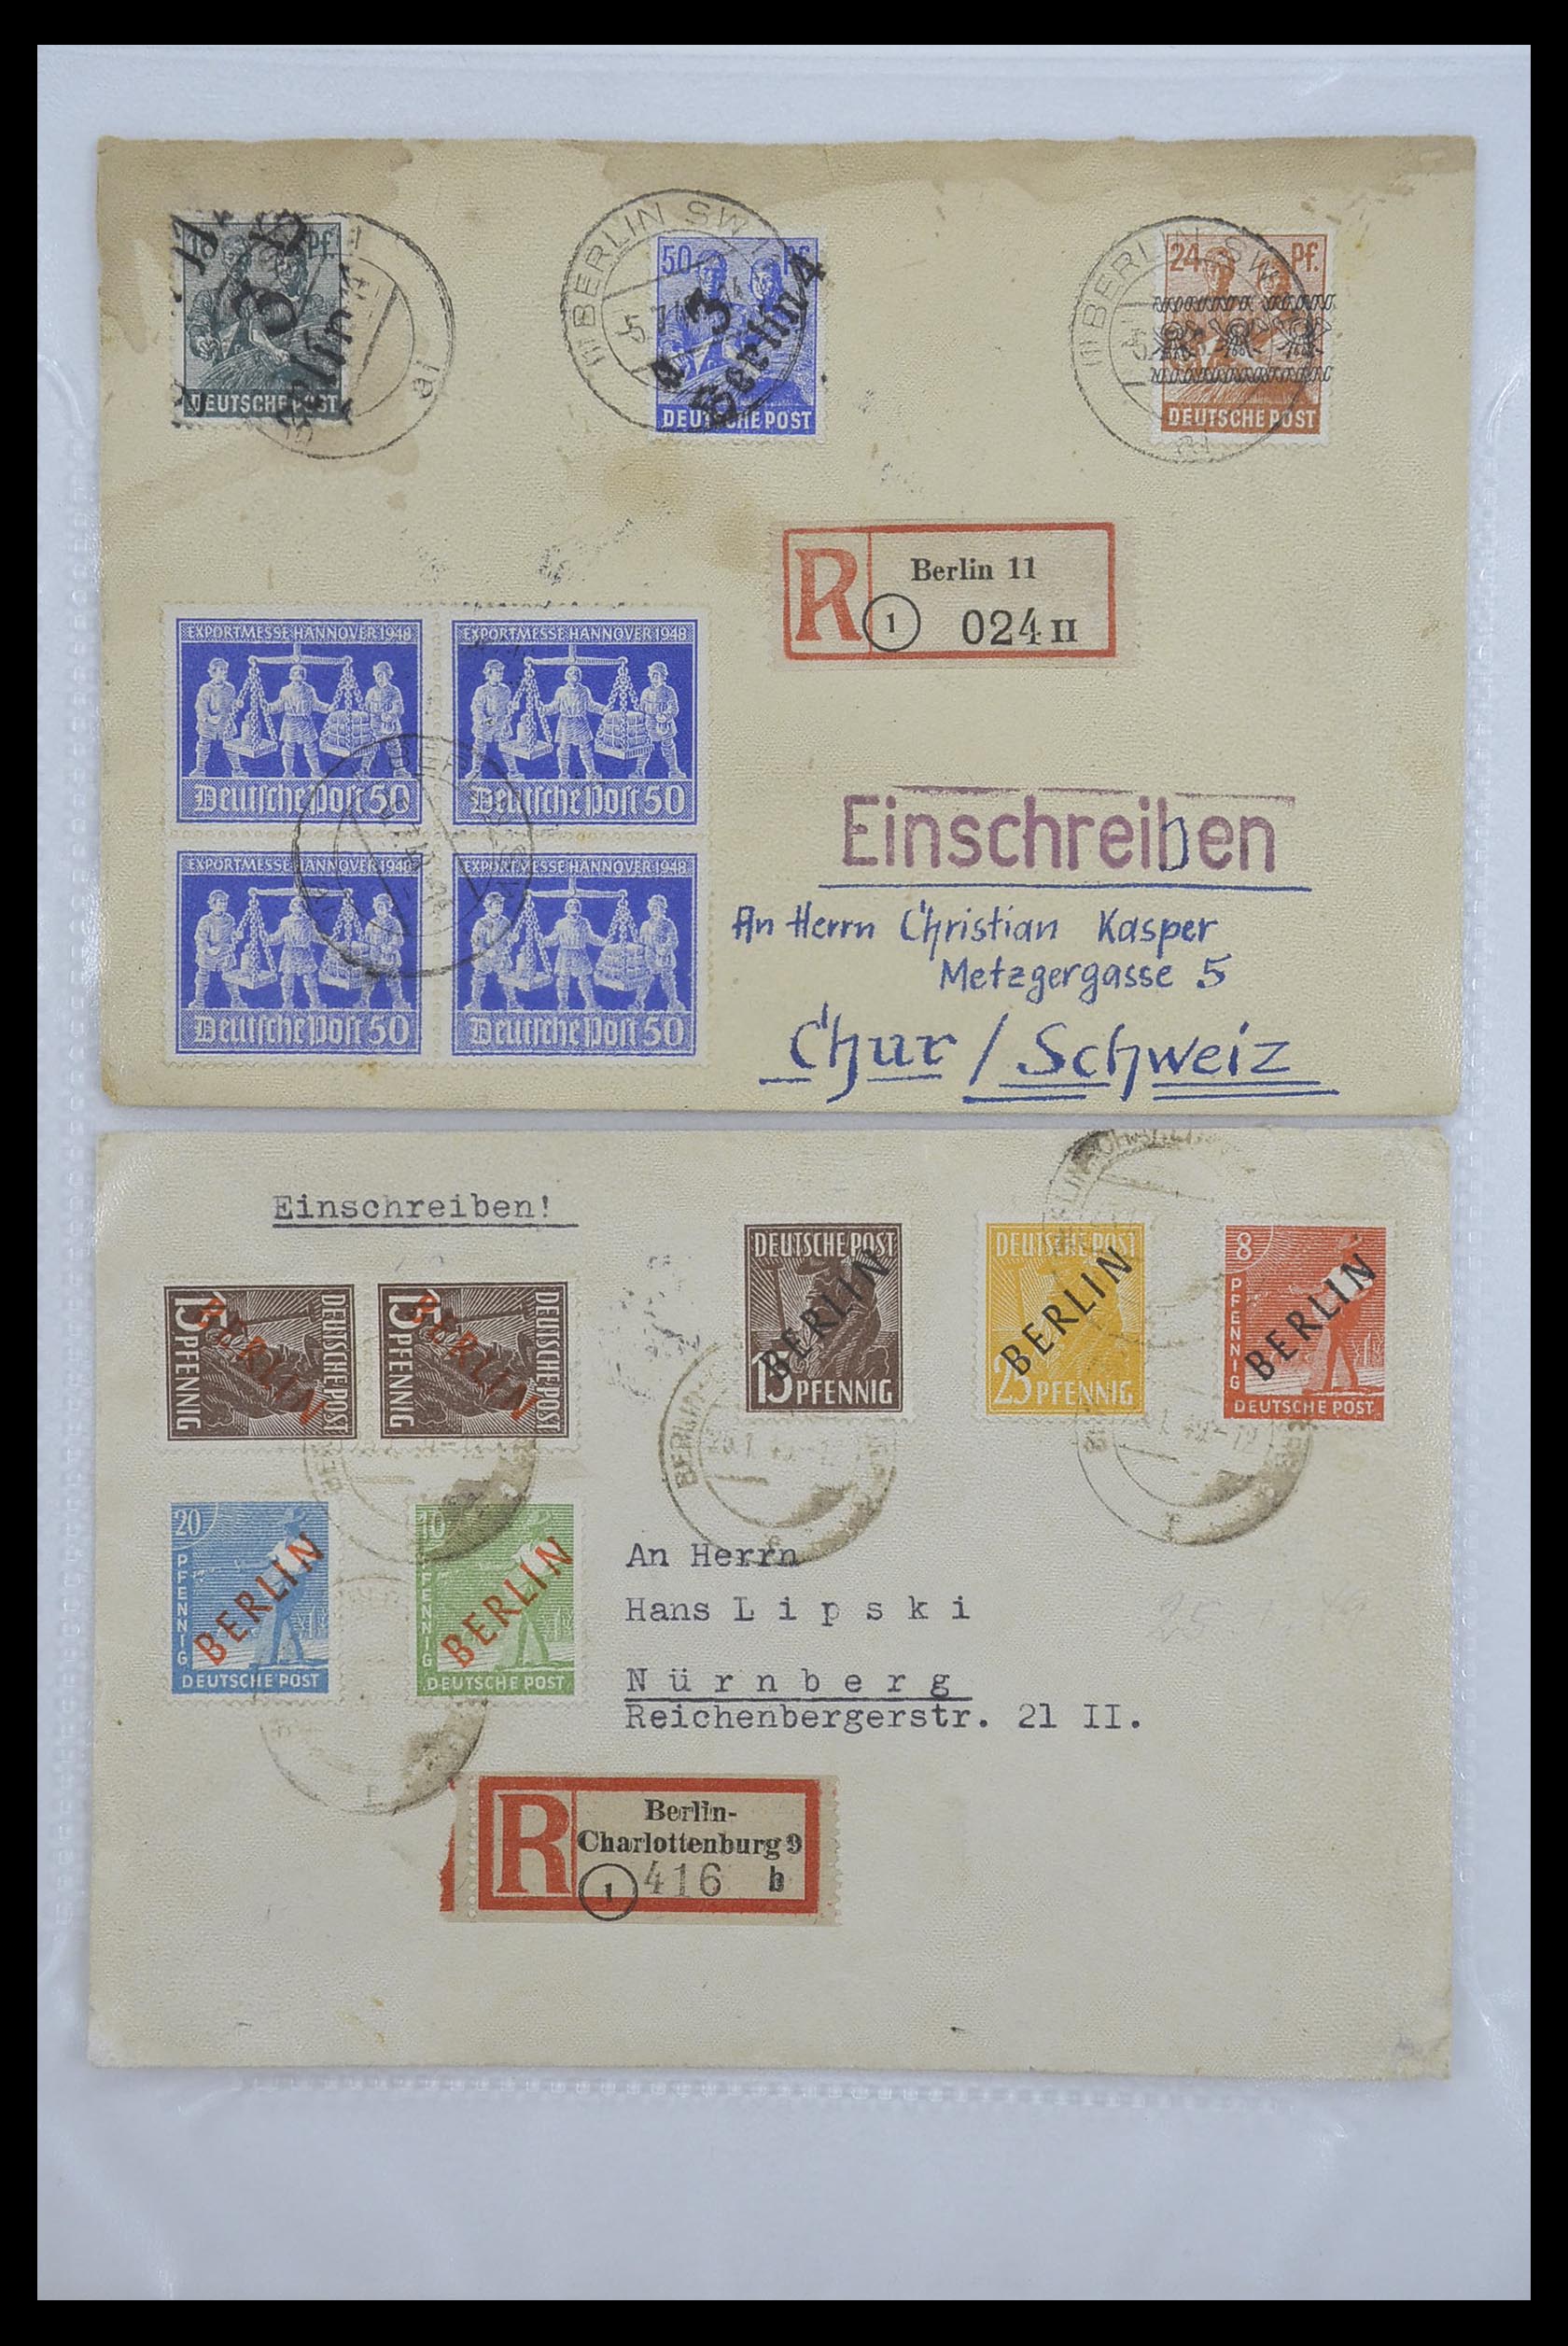 33290 019 - Stamp collection 33290 Berlin covers 1948-1957.